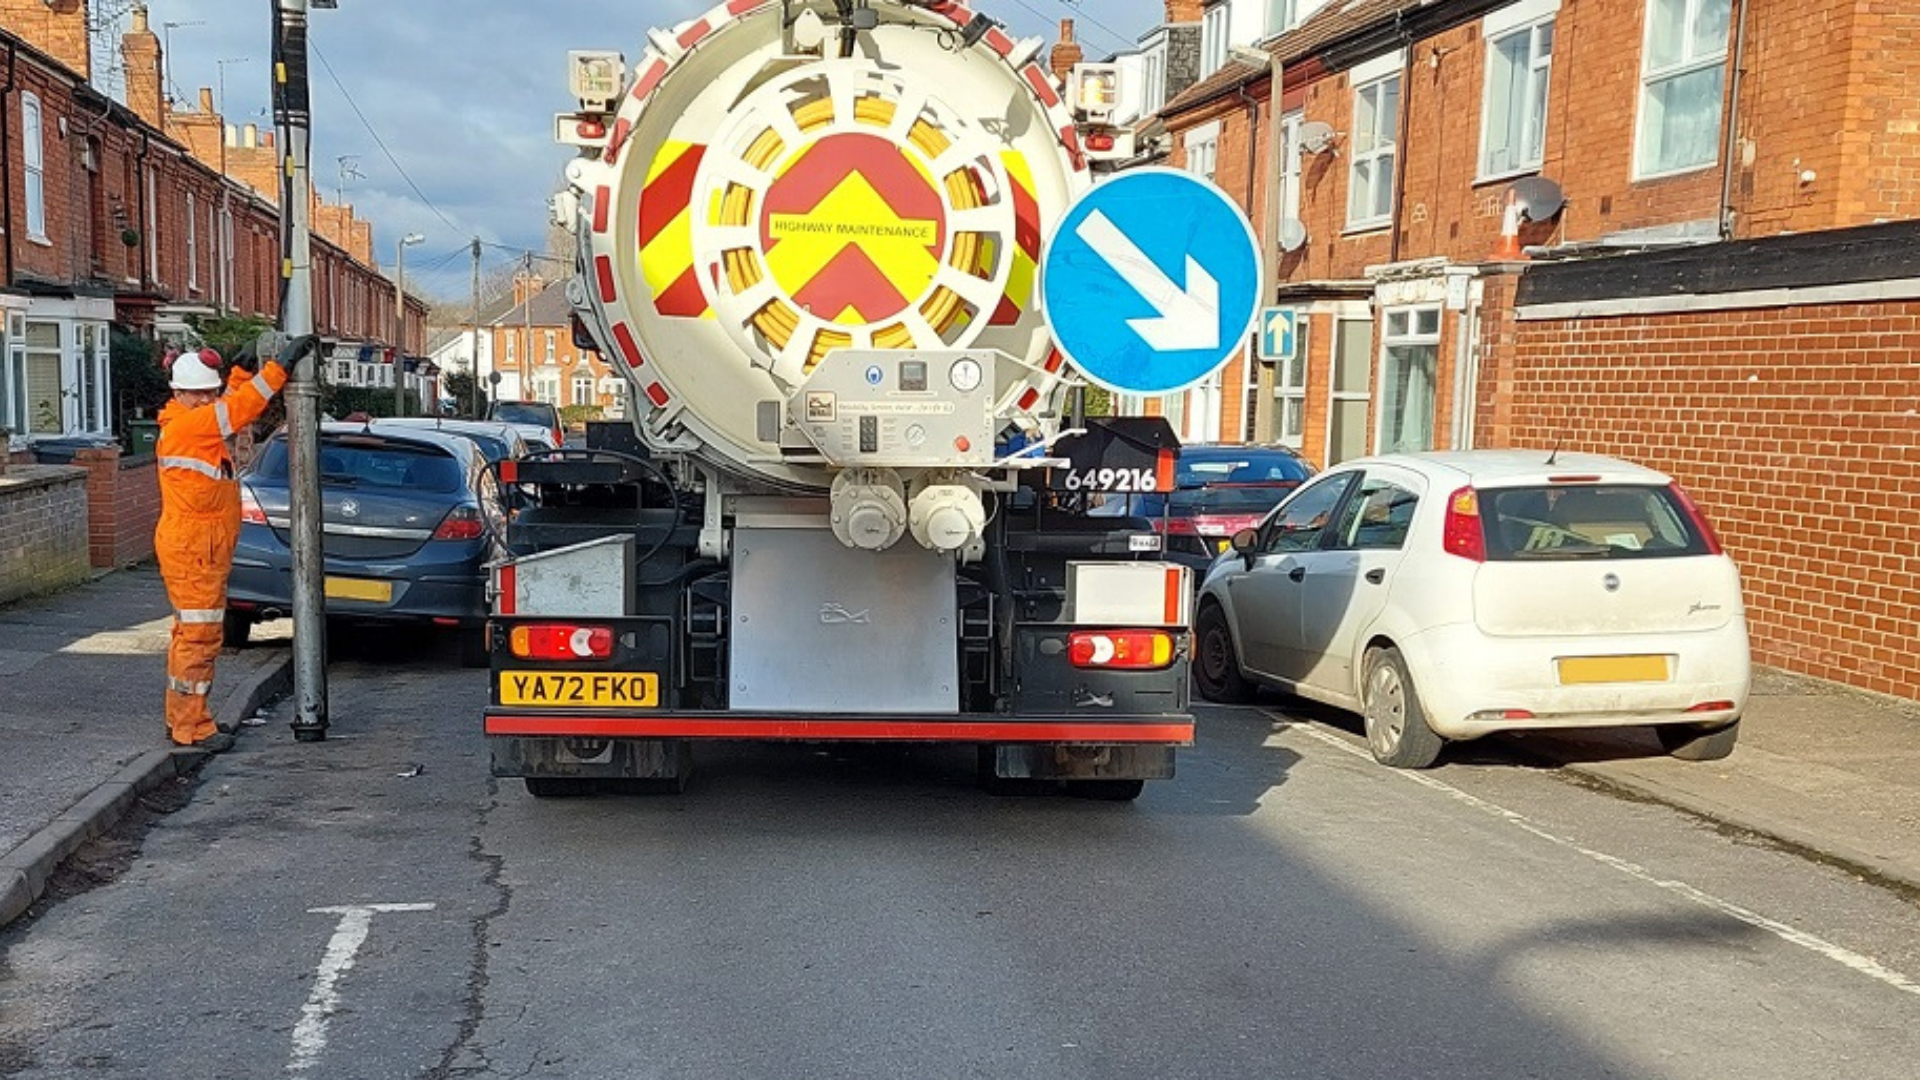 A Highways vehicle struggles to clear drains on a street lined with parked cars